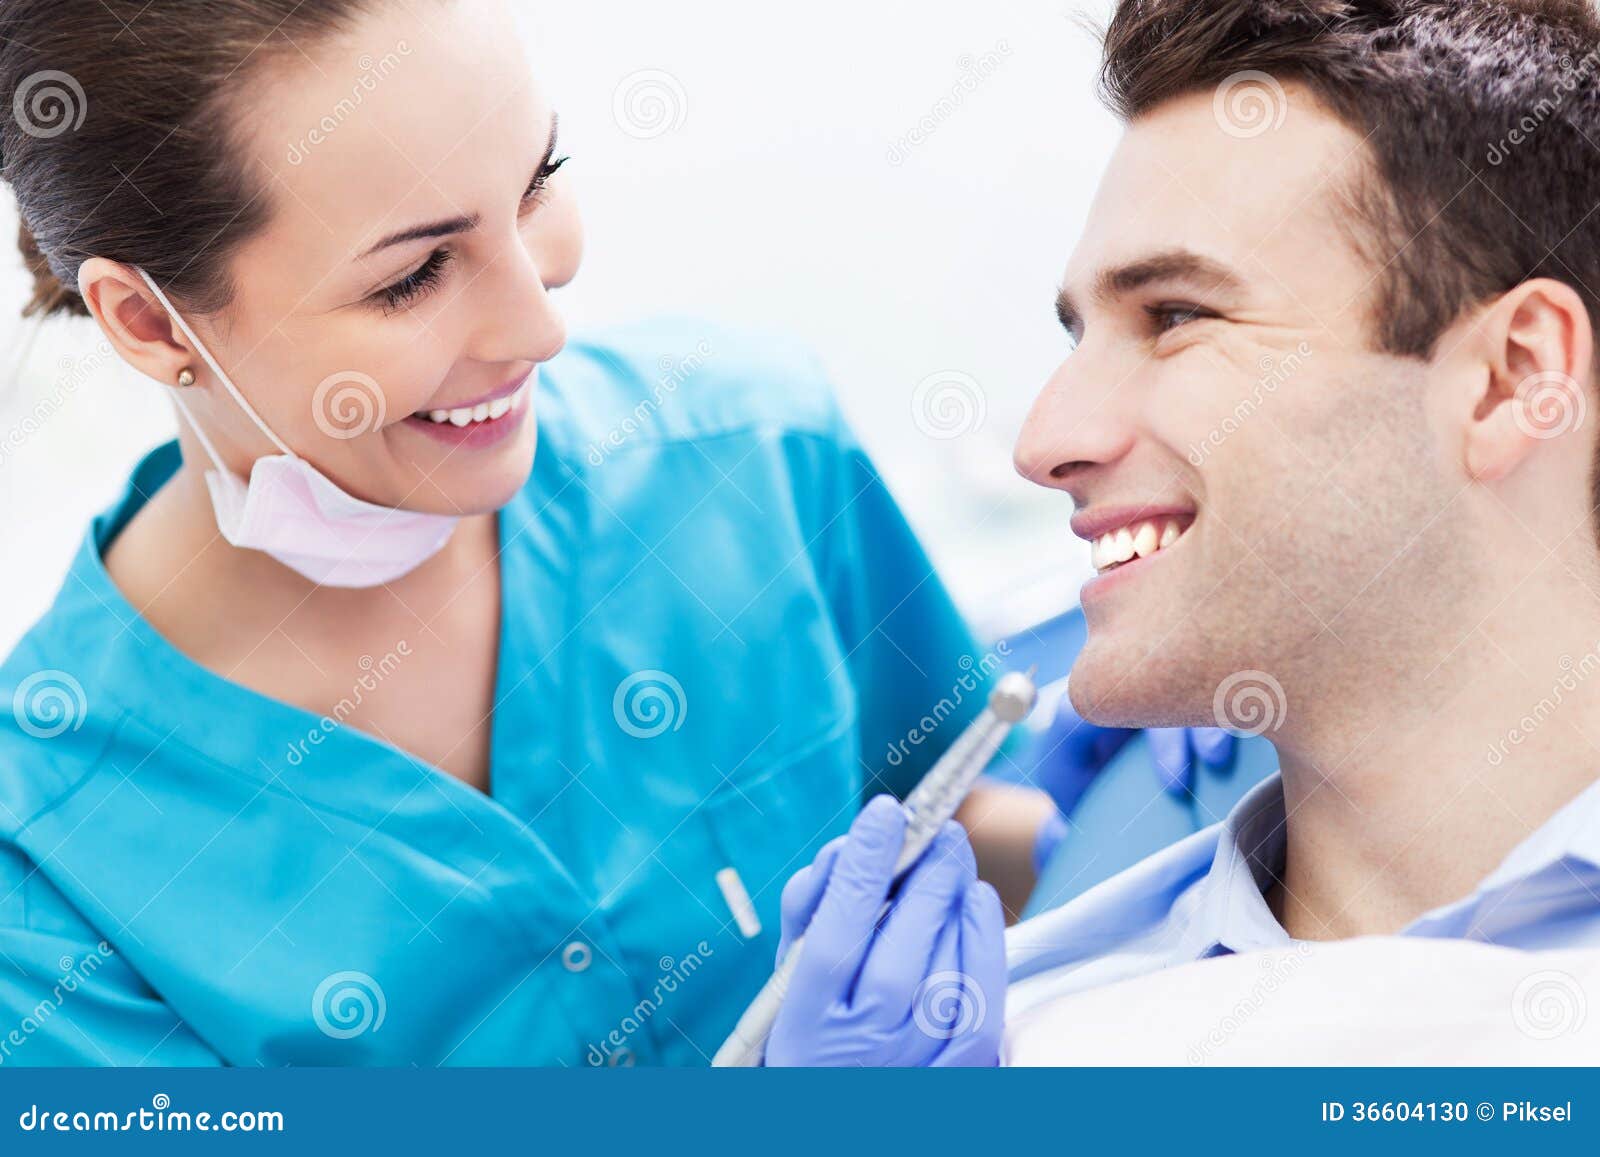 female dentist with male patient